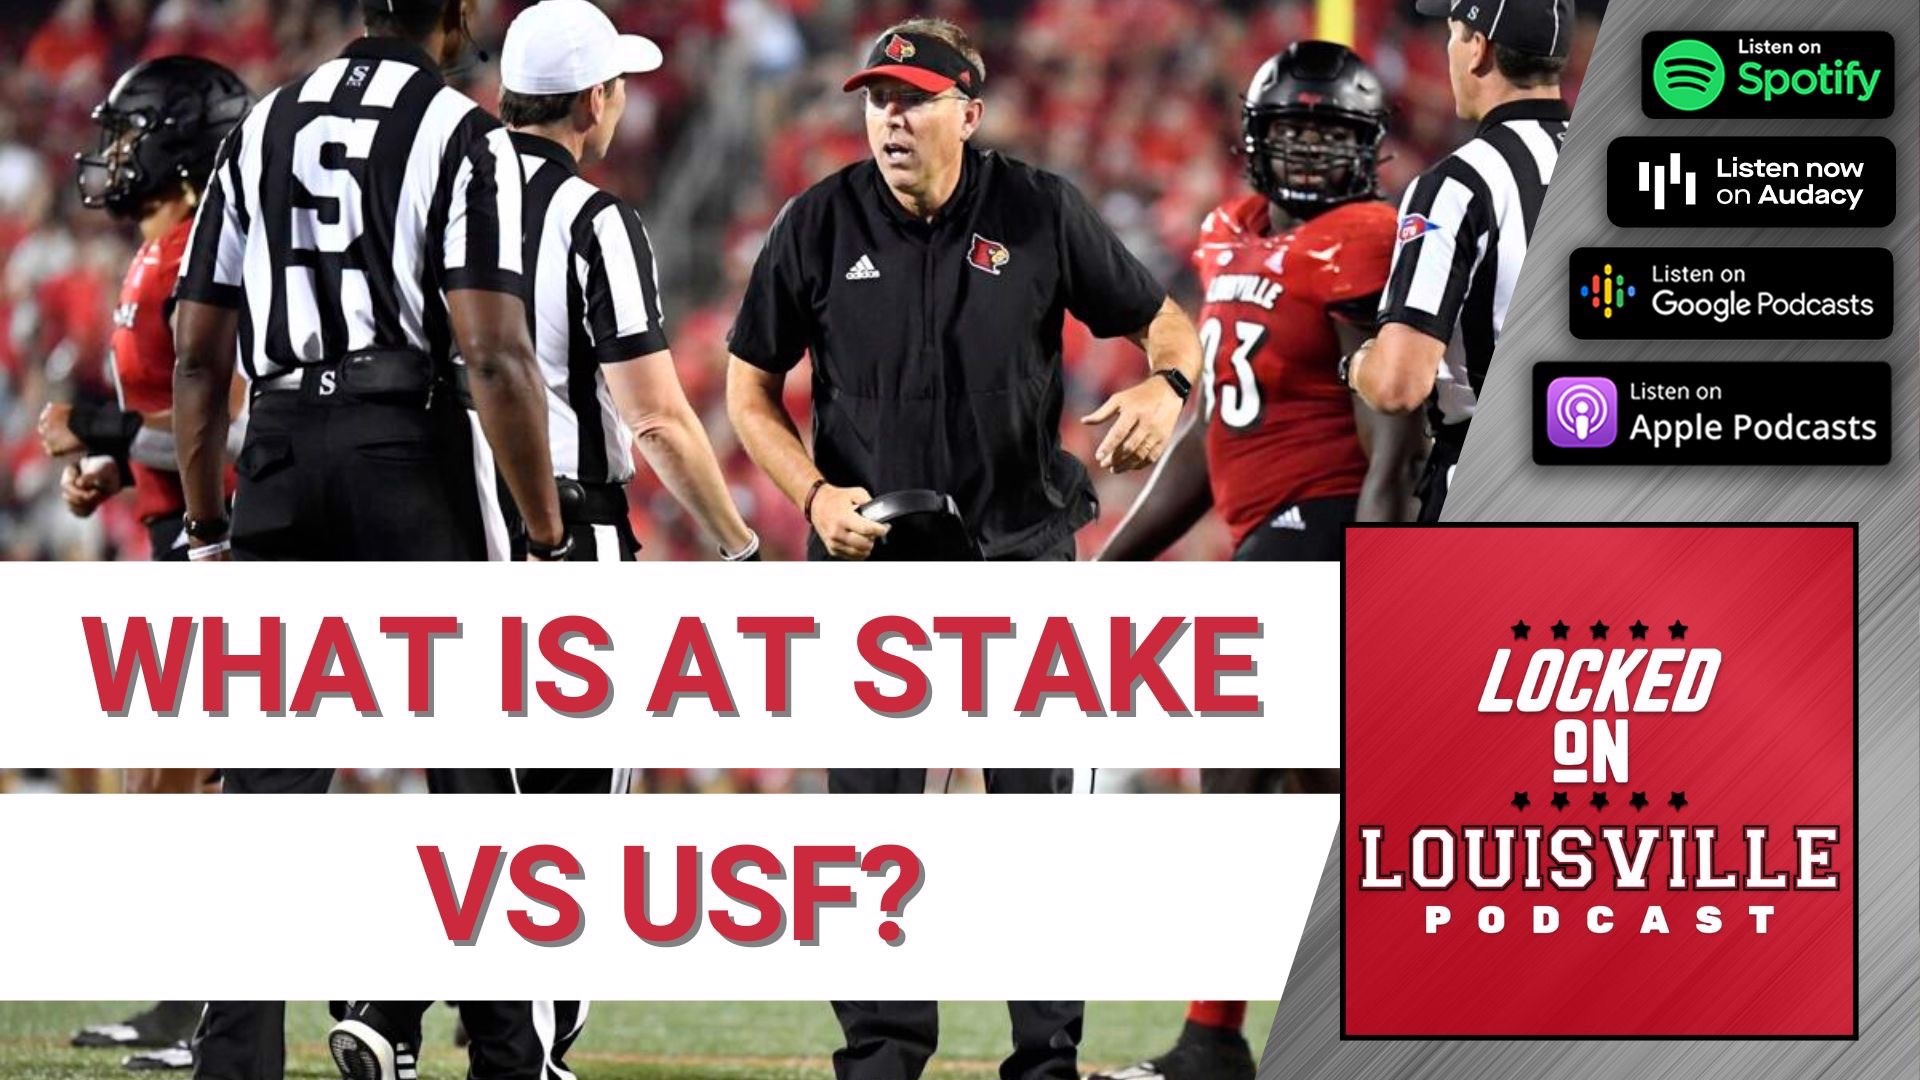 Cards vs Bulls...what's at stake?